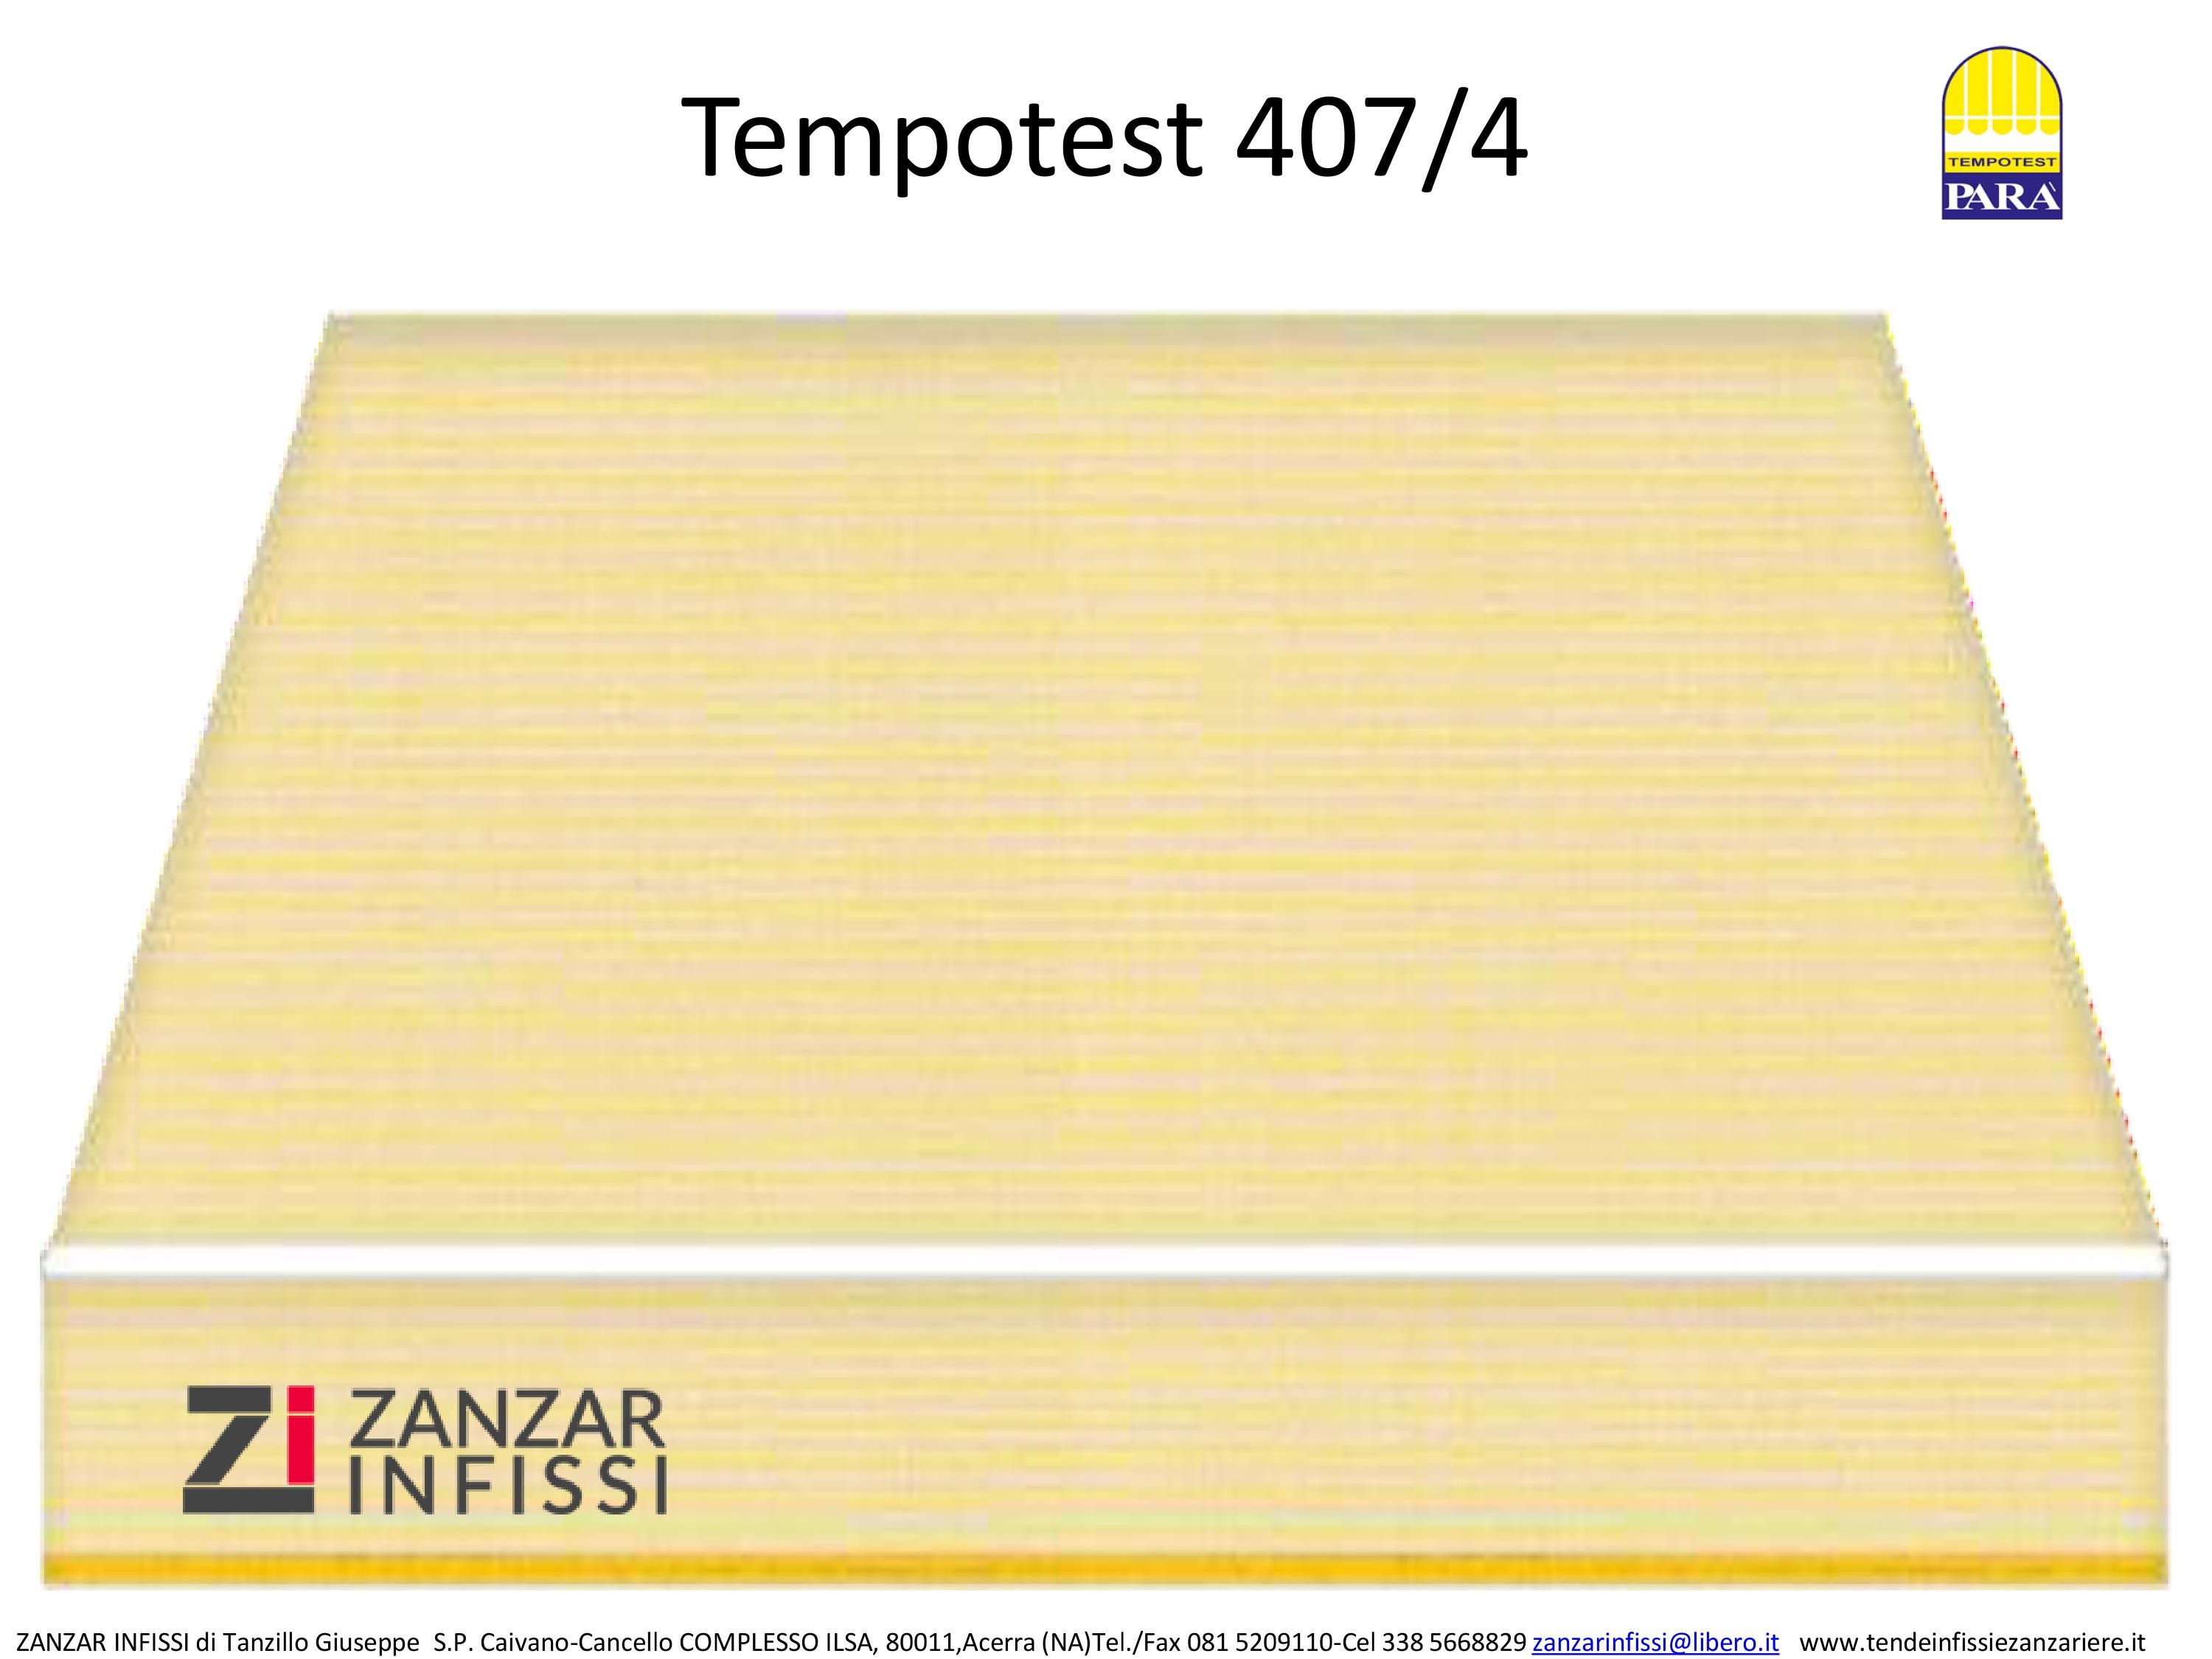 Tempotest 407/4